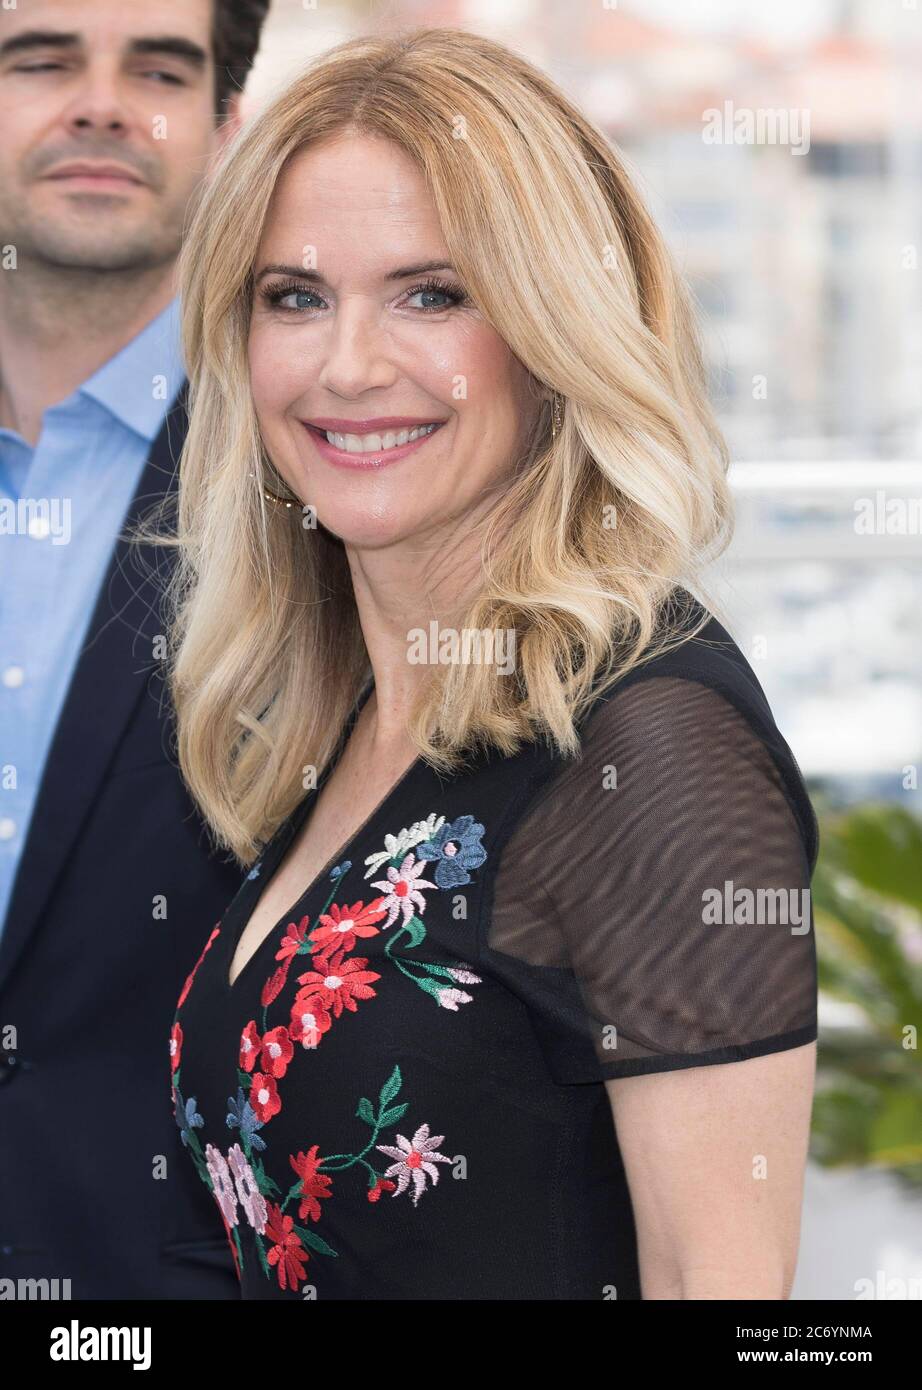 Kelly Preston attends the photo call of 'Rendezvous With John Travolta - Gotti' during the 71st Cannes Film Festival at Palais des Festivals in Cannes, France, on 15 May 2018. | usage worldwide Credit DPA/MediaPunch ***FOR USA ONLY*** Stock Photo